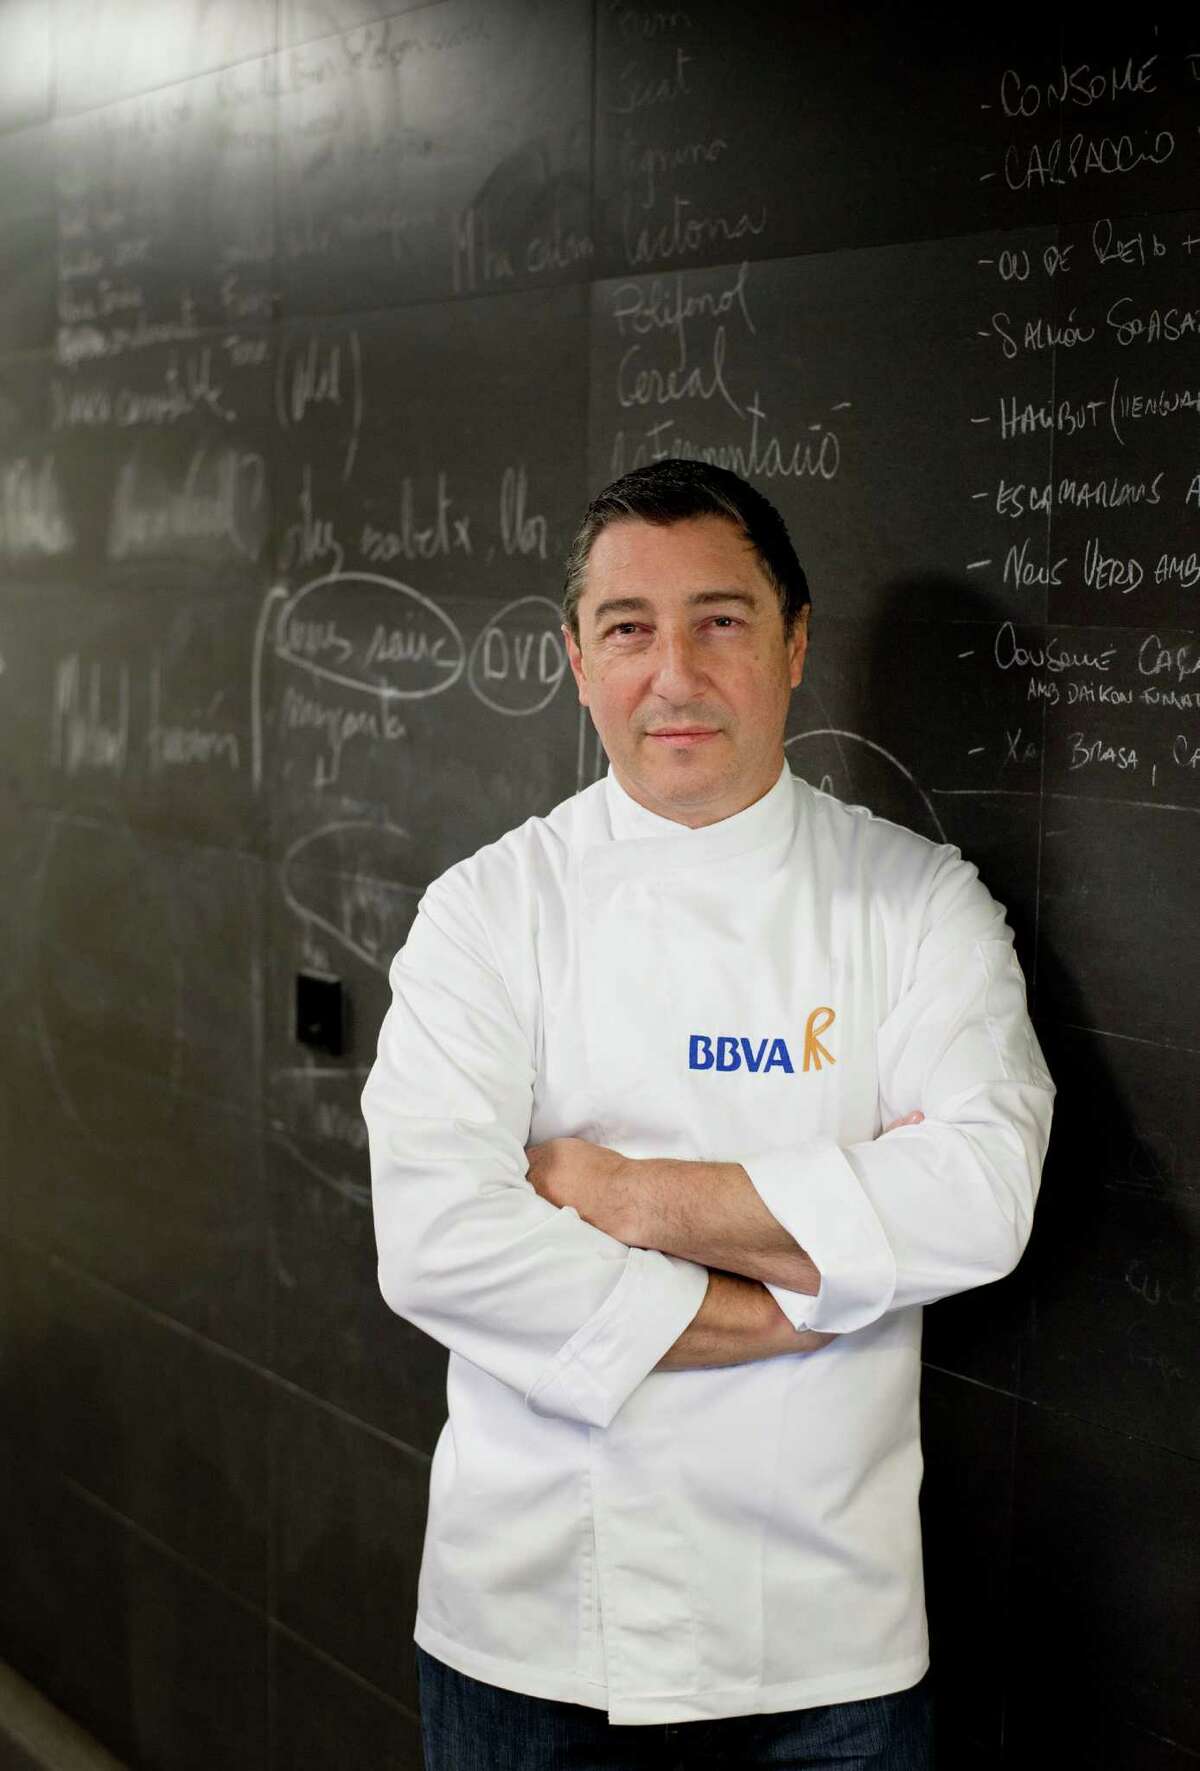 Joan Roca is chef and co-founder of El Cellar de Can Roca in Girona, Spain, the number one restaurant on the influential San Pellegrino list of the World's 50 Best Restaurants.